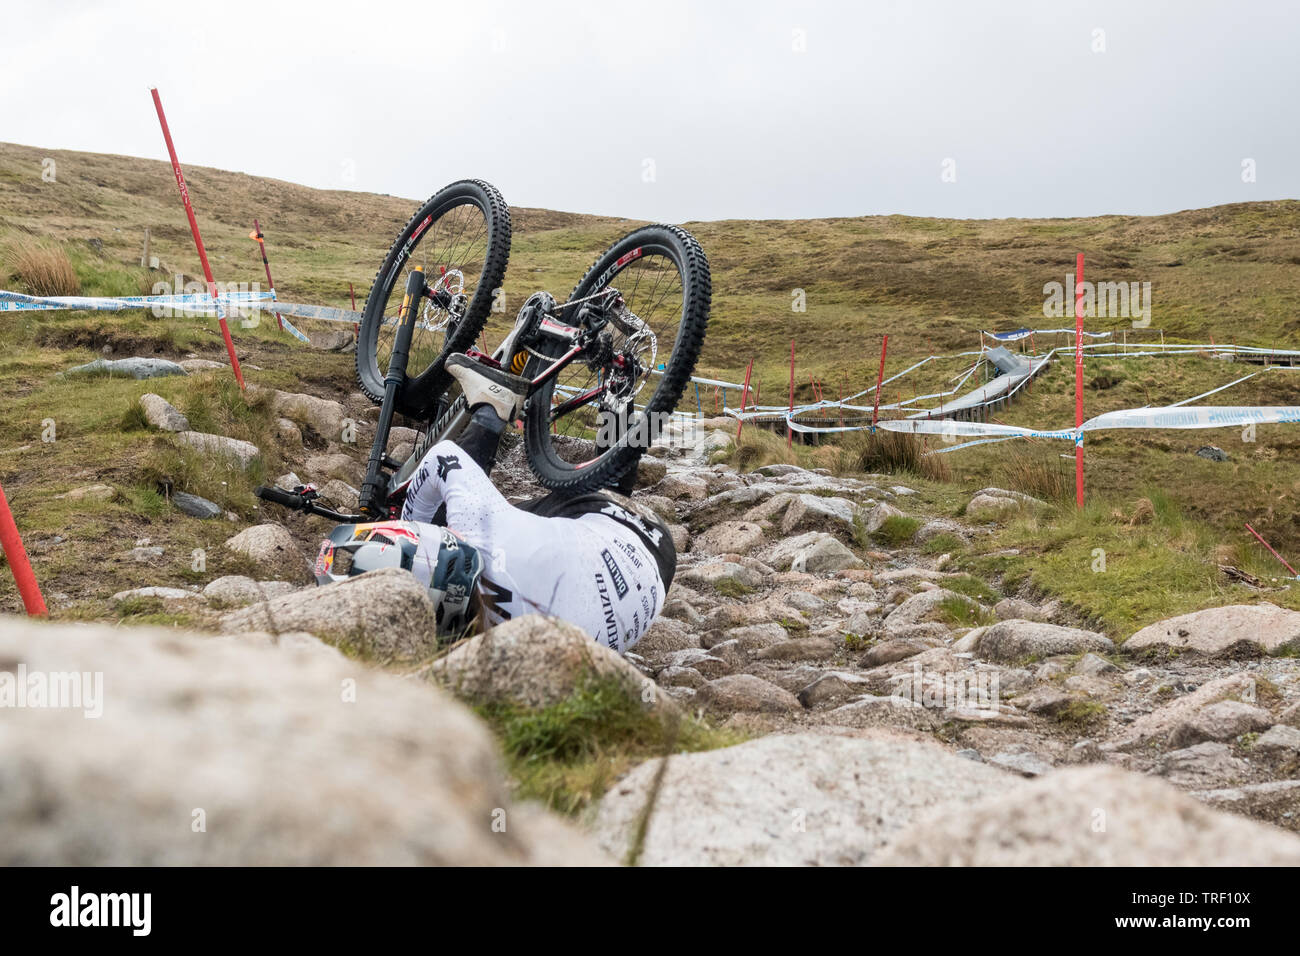 Finn Iles crash sequence during practice run - UCI Mountain Bike World Cup at Fort William, Scotland - series of 13 images  image 11/13 Stock Photo